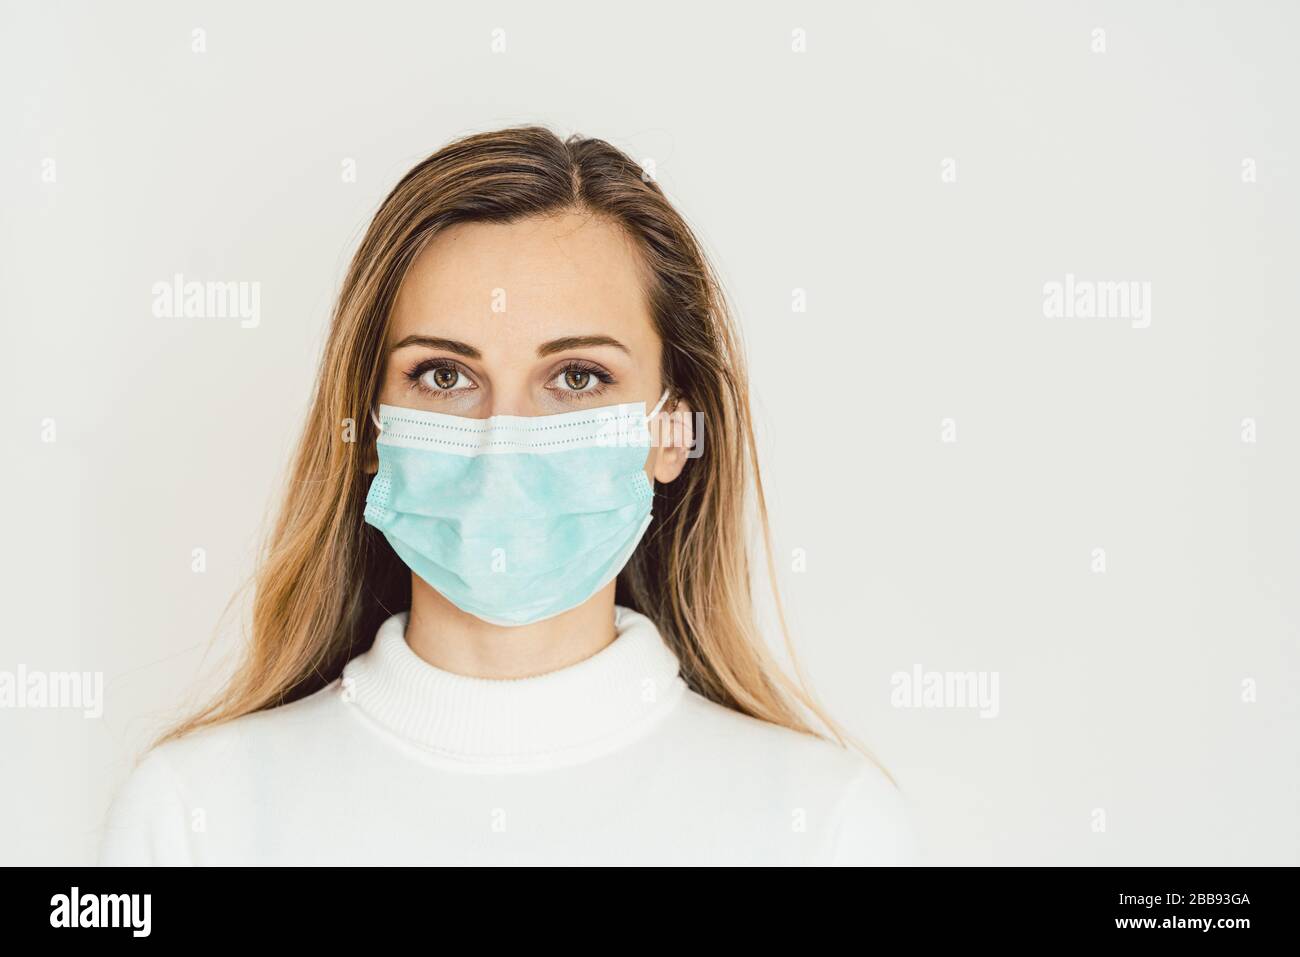 Woman with corona mask protecting her from Covid-19 Stock Photo